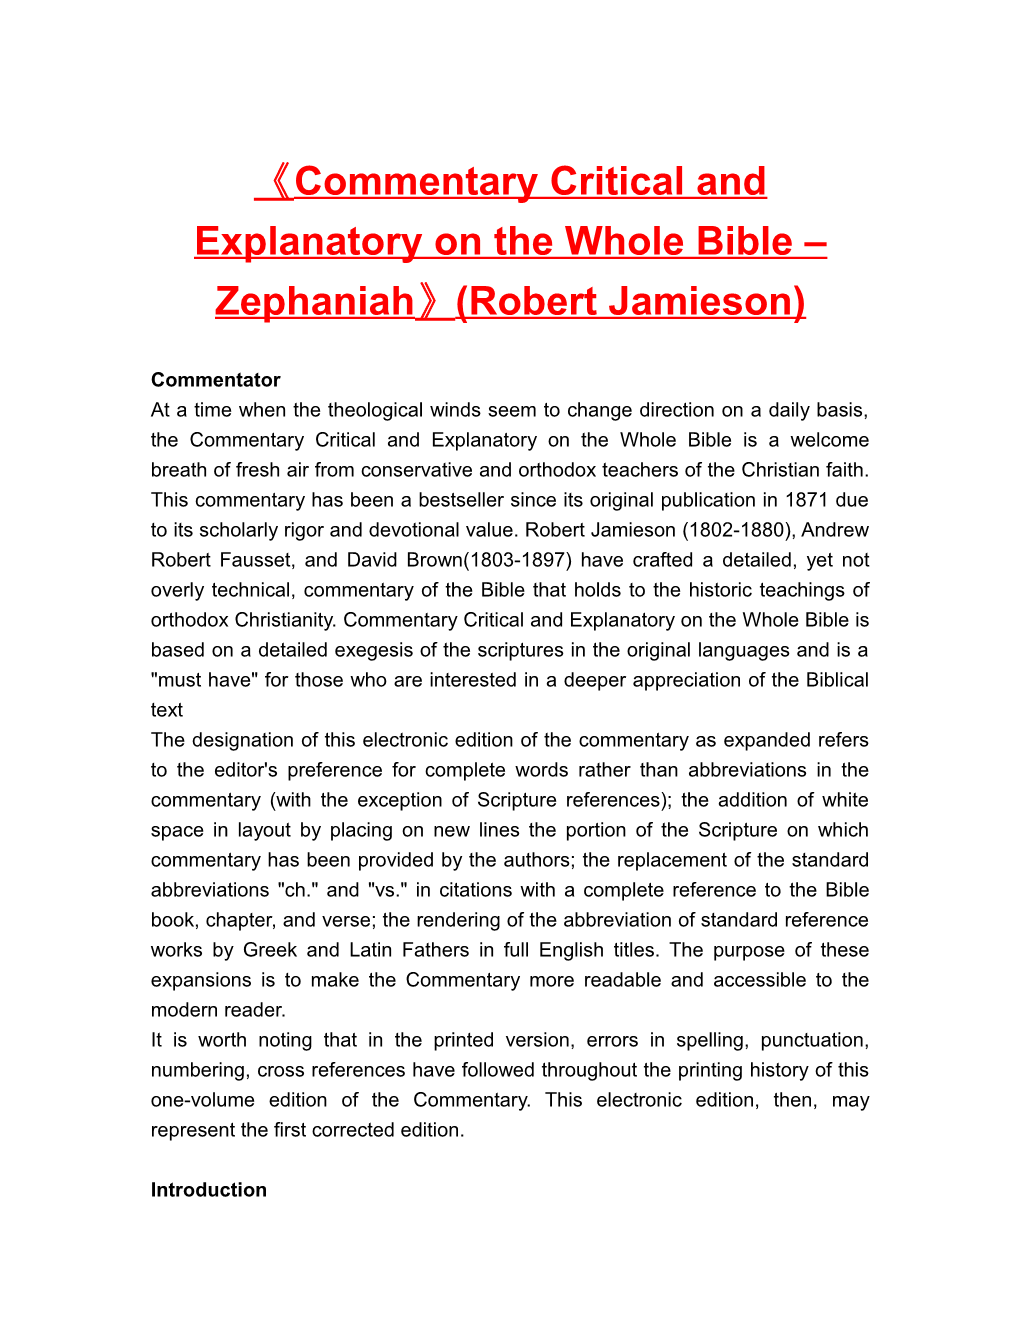 Commentary Critical and Explanatory on the Whole Bible Zephaniah (Robert Jamieson)